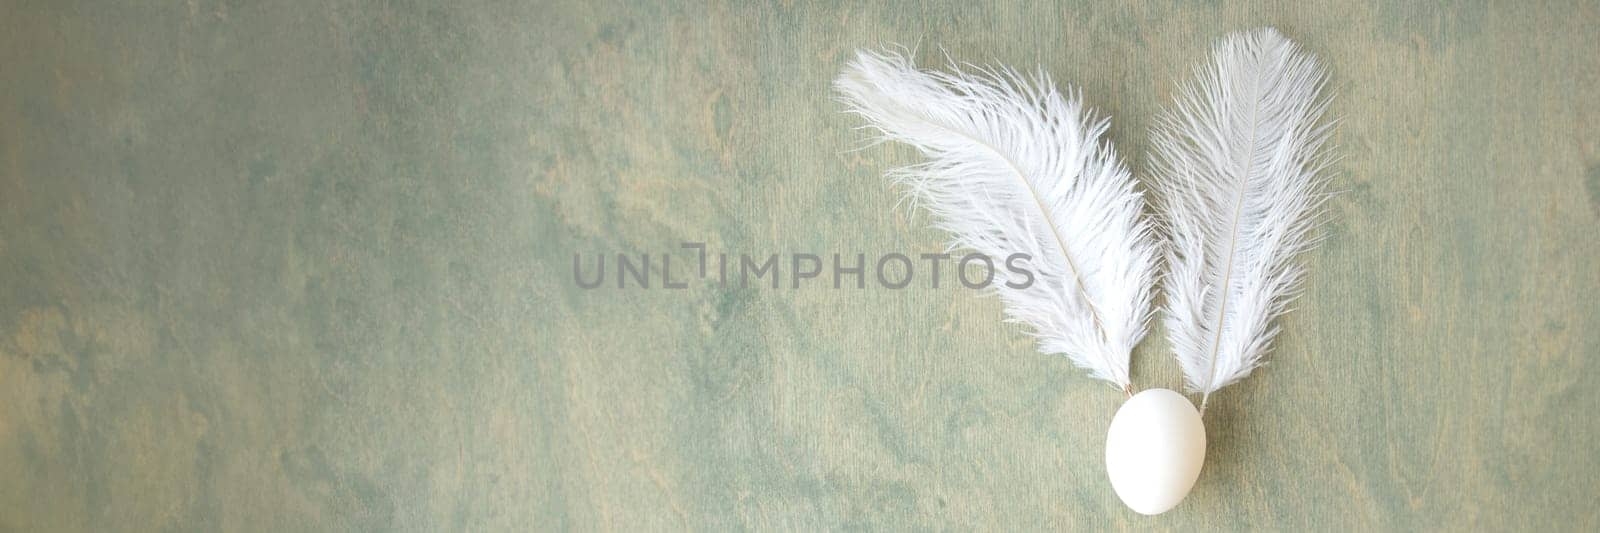 banner of Easter background, egg and white feathers in the form of a hare on a green wooden background